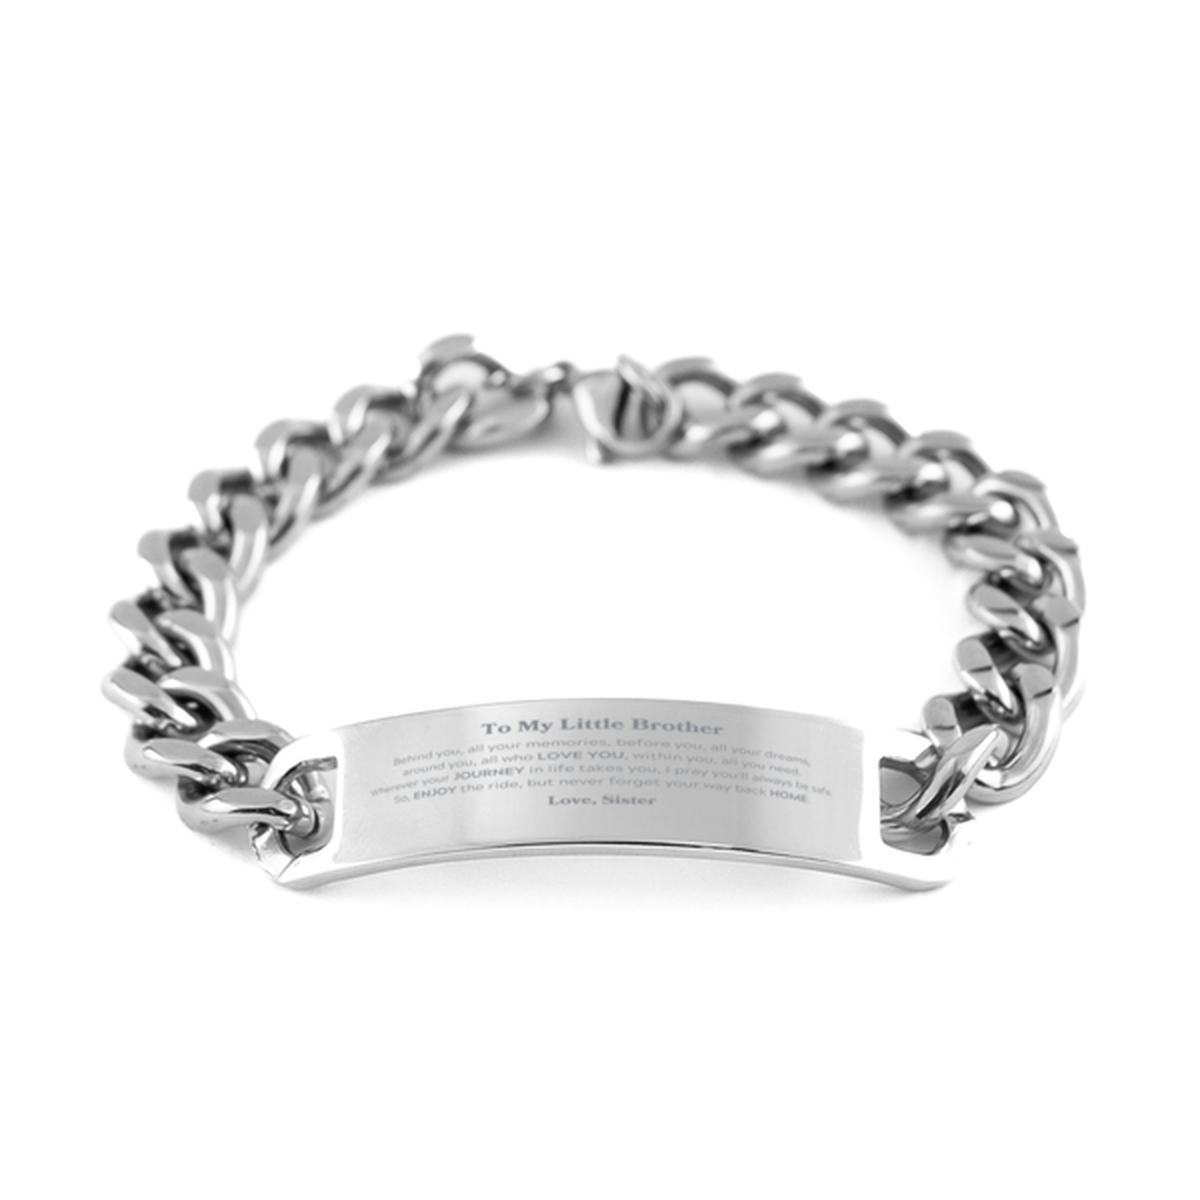 To My Little Brother Graduation Gifts from Sister, Little Brother Cuban Chain Stainless Steel Bracelet Christmas Birthday Gifts for Little Brother Behind you, all your memories, before you, all your dreams. Love, Sister